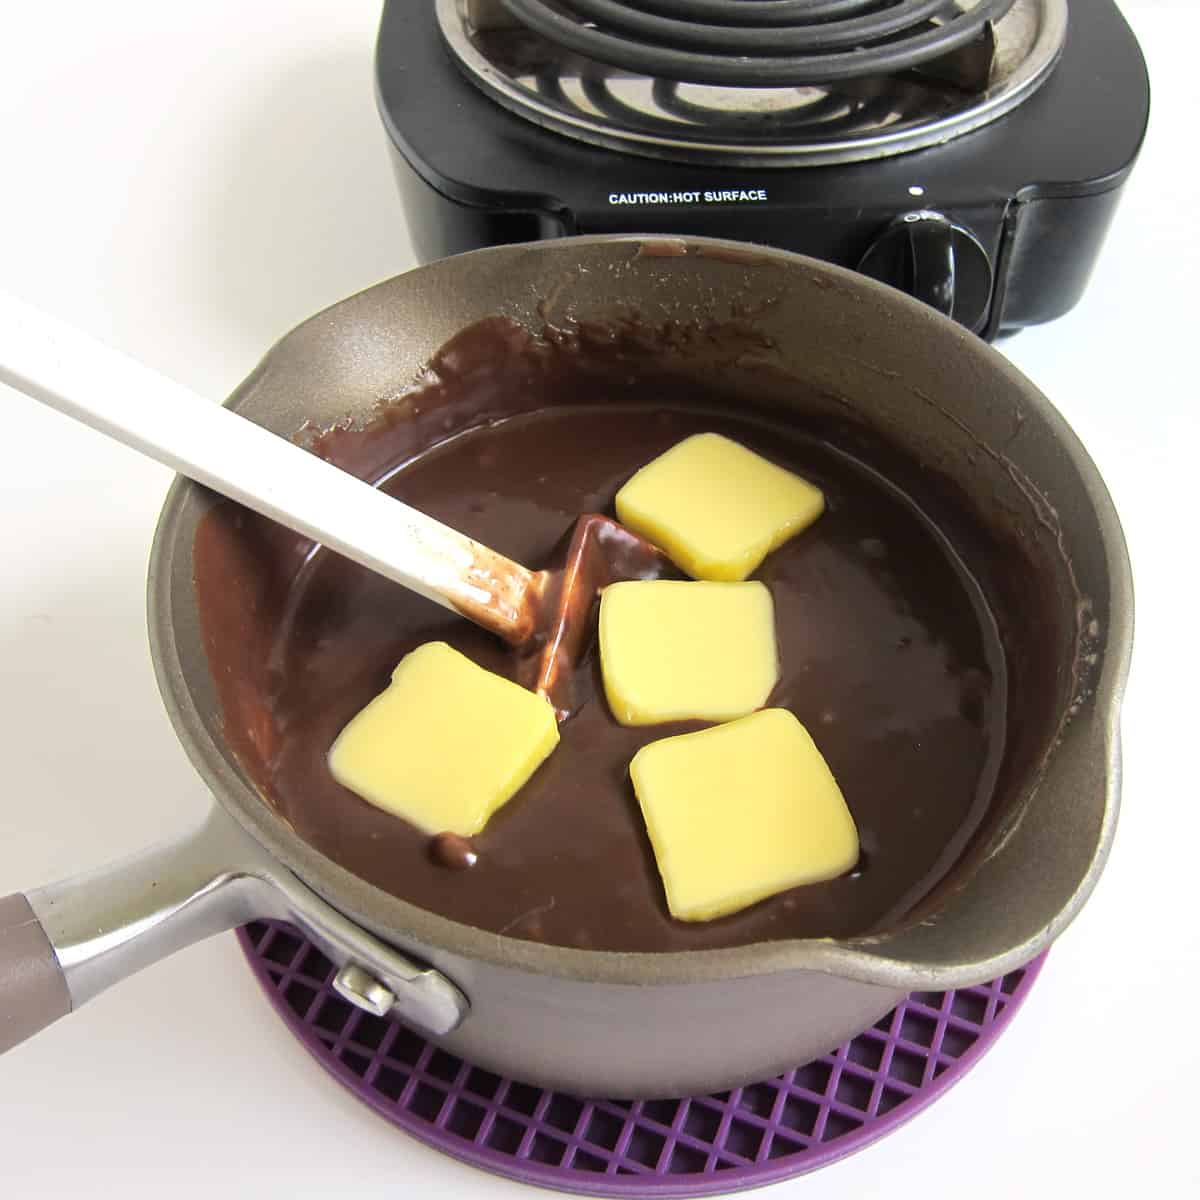 Adding 2 tablespoons of butter to the hot fudge sauce in the saucepan off heat.